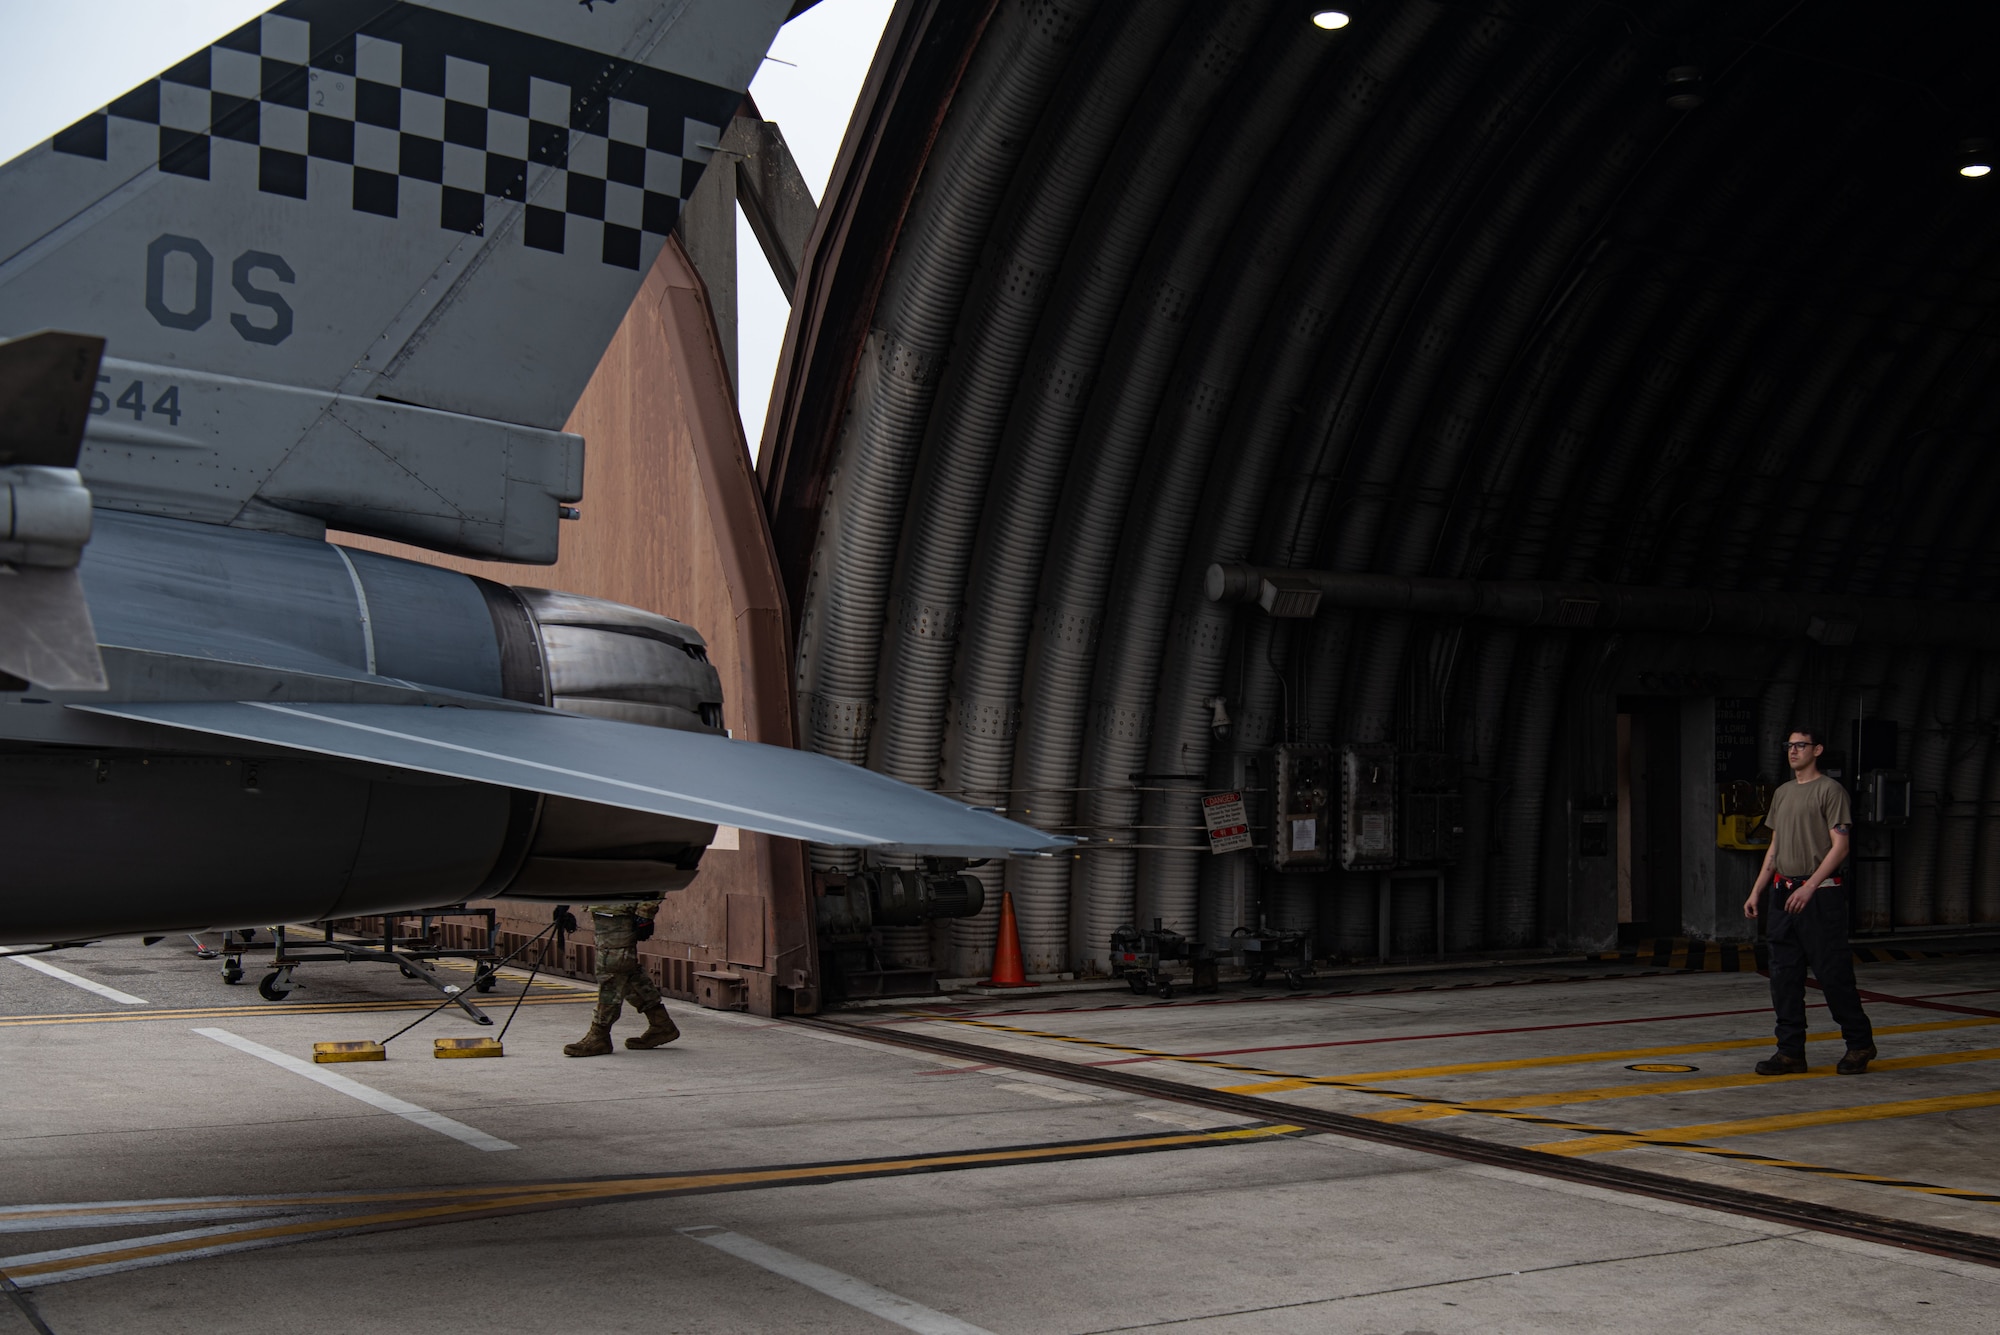 Staff Sgt. Armando Sutton, 36th Aircraft Maintenance Unit F-16 dedicated crew chief, assists in parking an F-16 Fighting Falcon in a hangar at Osan Air Base, Republic of Korea, March 18, 2022.